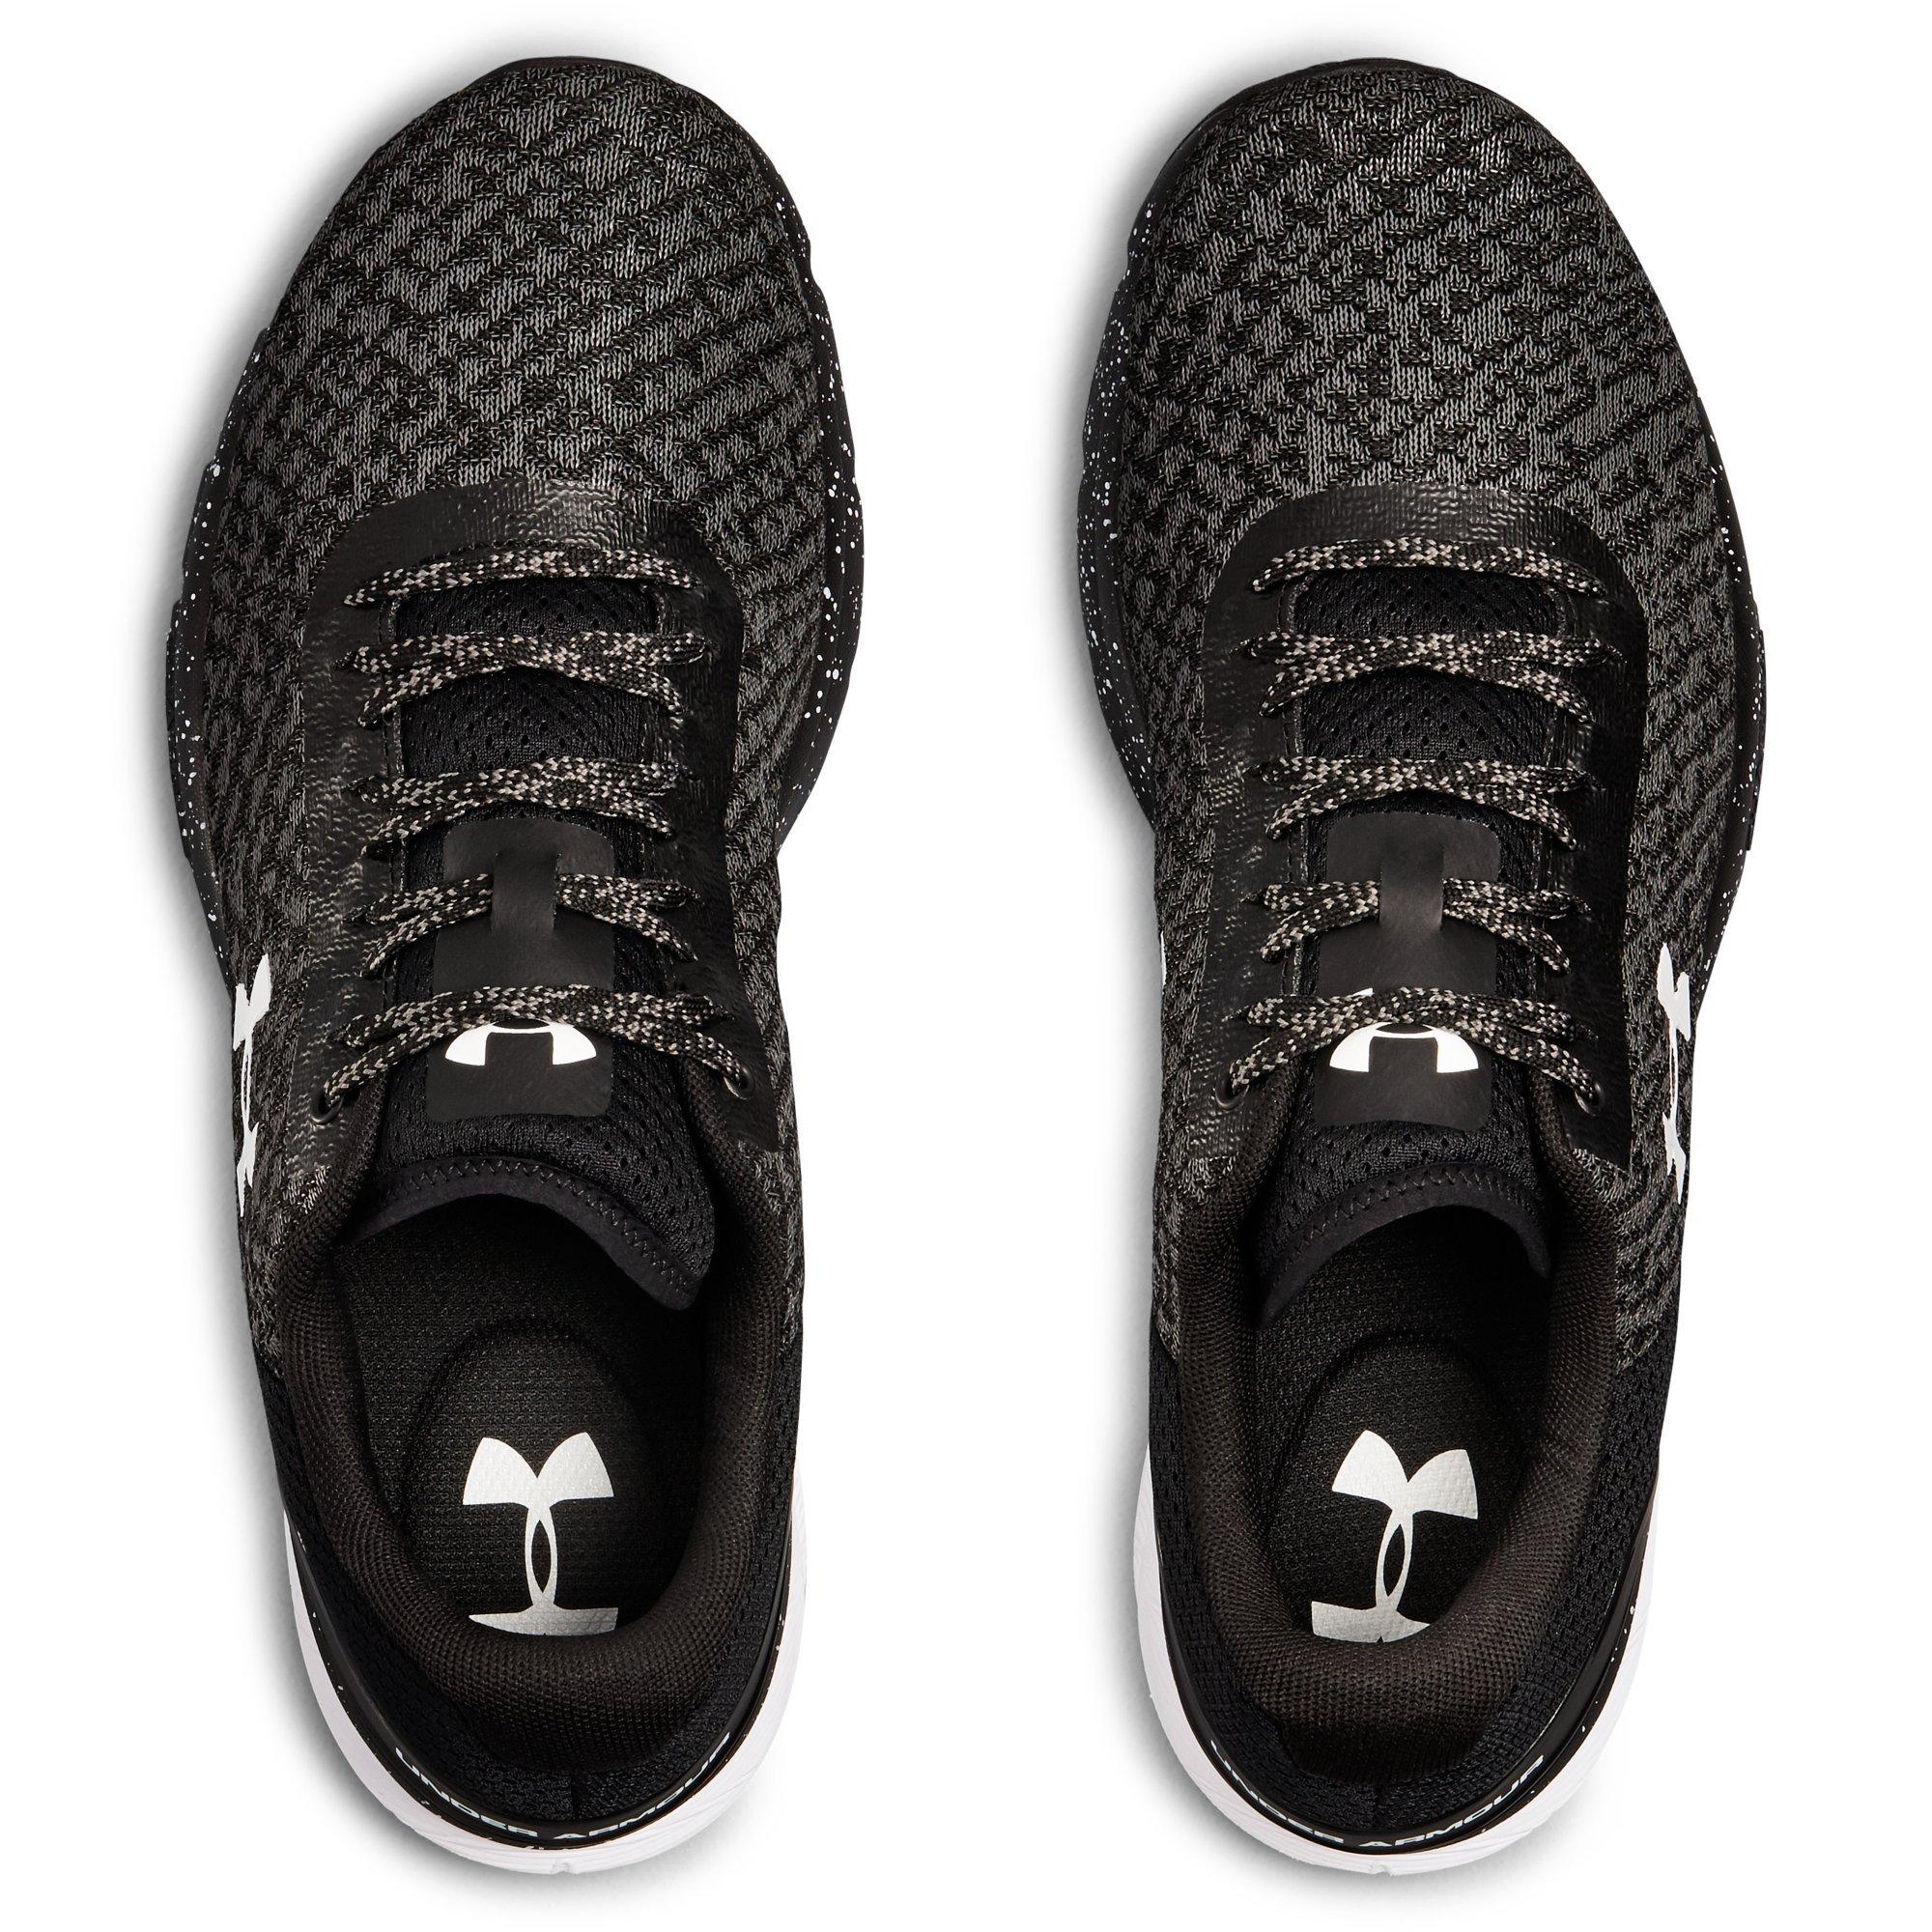 under armour charged escape 2 reflect men's running shoes